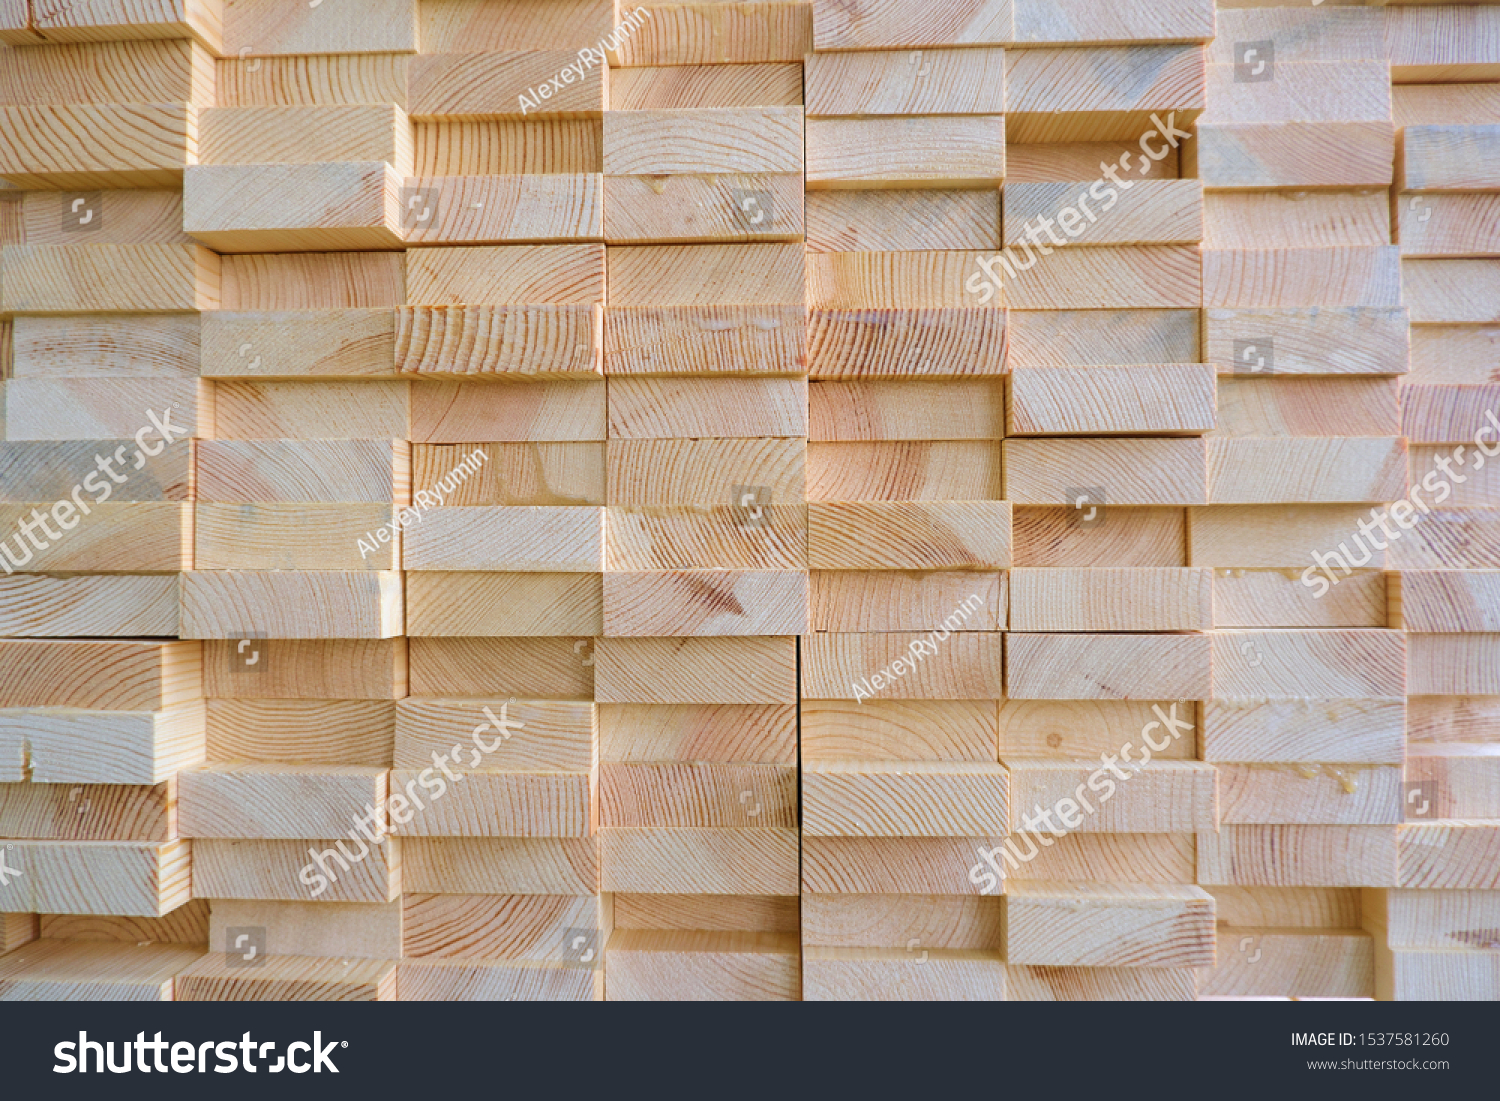 Stack of three-layer wooden glued laminated timber beams from pine finger joint spliced boards